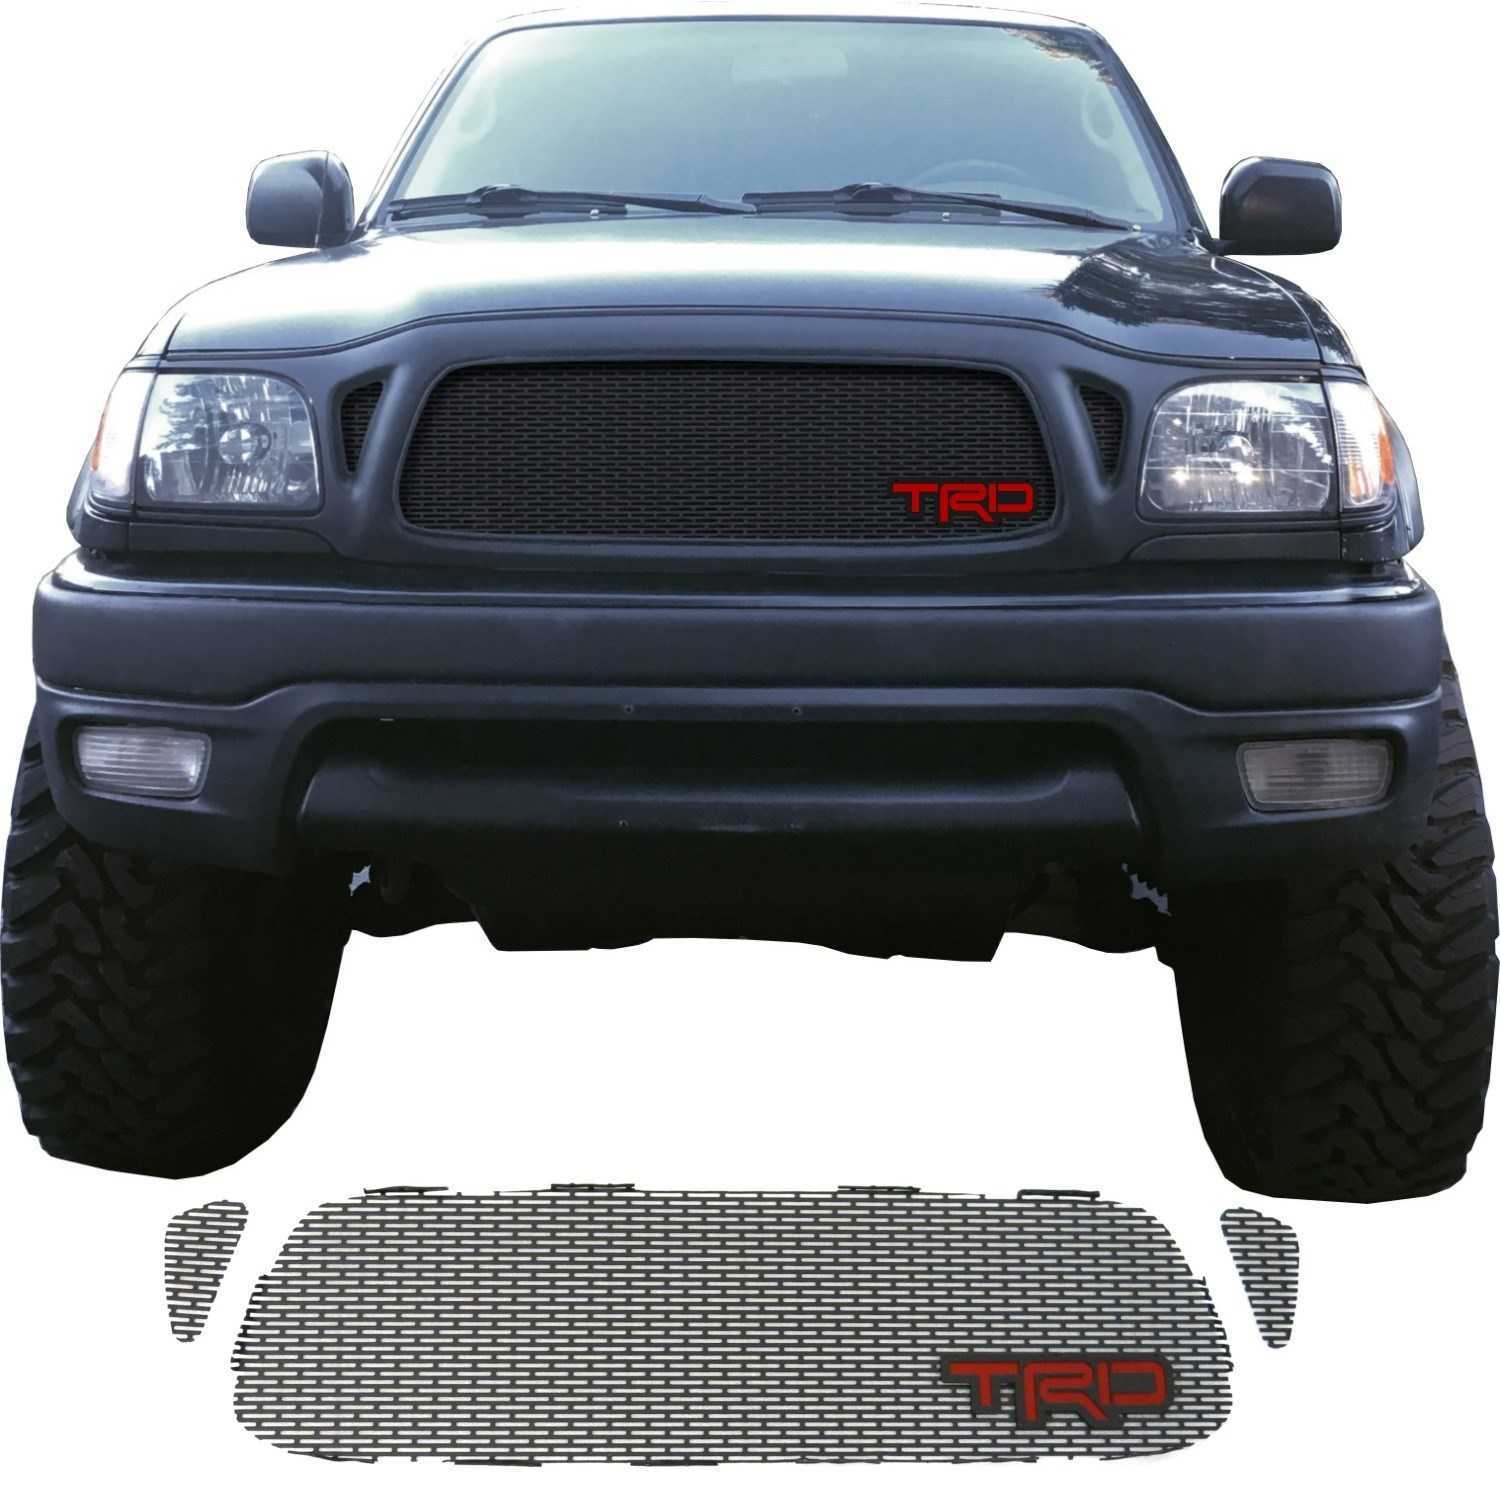 2001 - 2004 Toyota Tacoma Grill Mesh With TRD Emblem